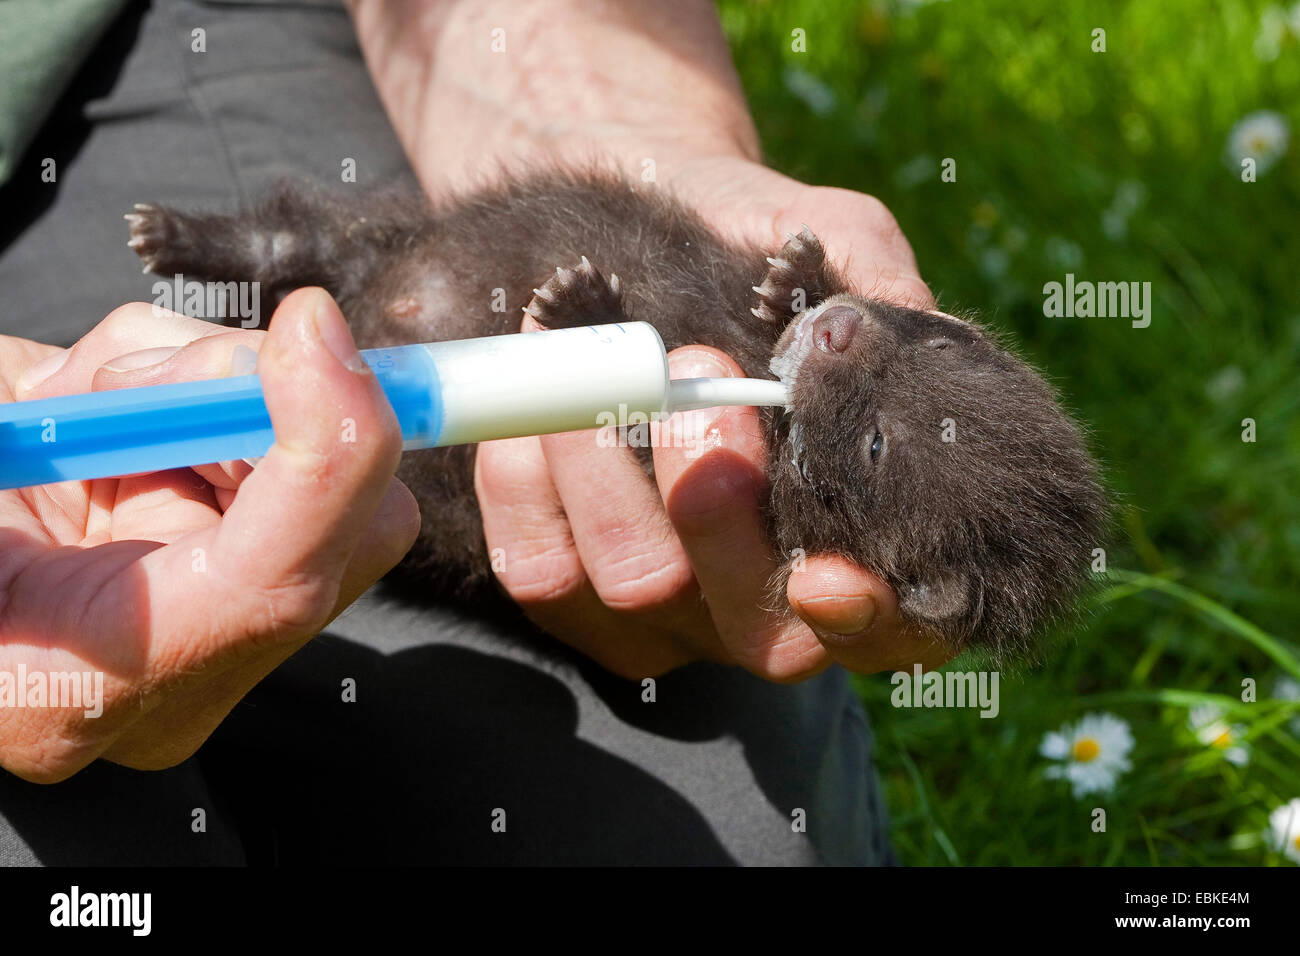 raccoon dog (Nyctereutes procyonoides), orphaned puppy rearing by hand and feeding with special milk, Germany Stock Photo